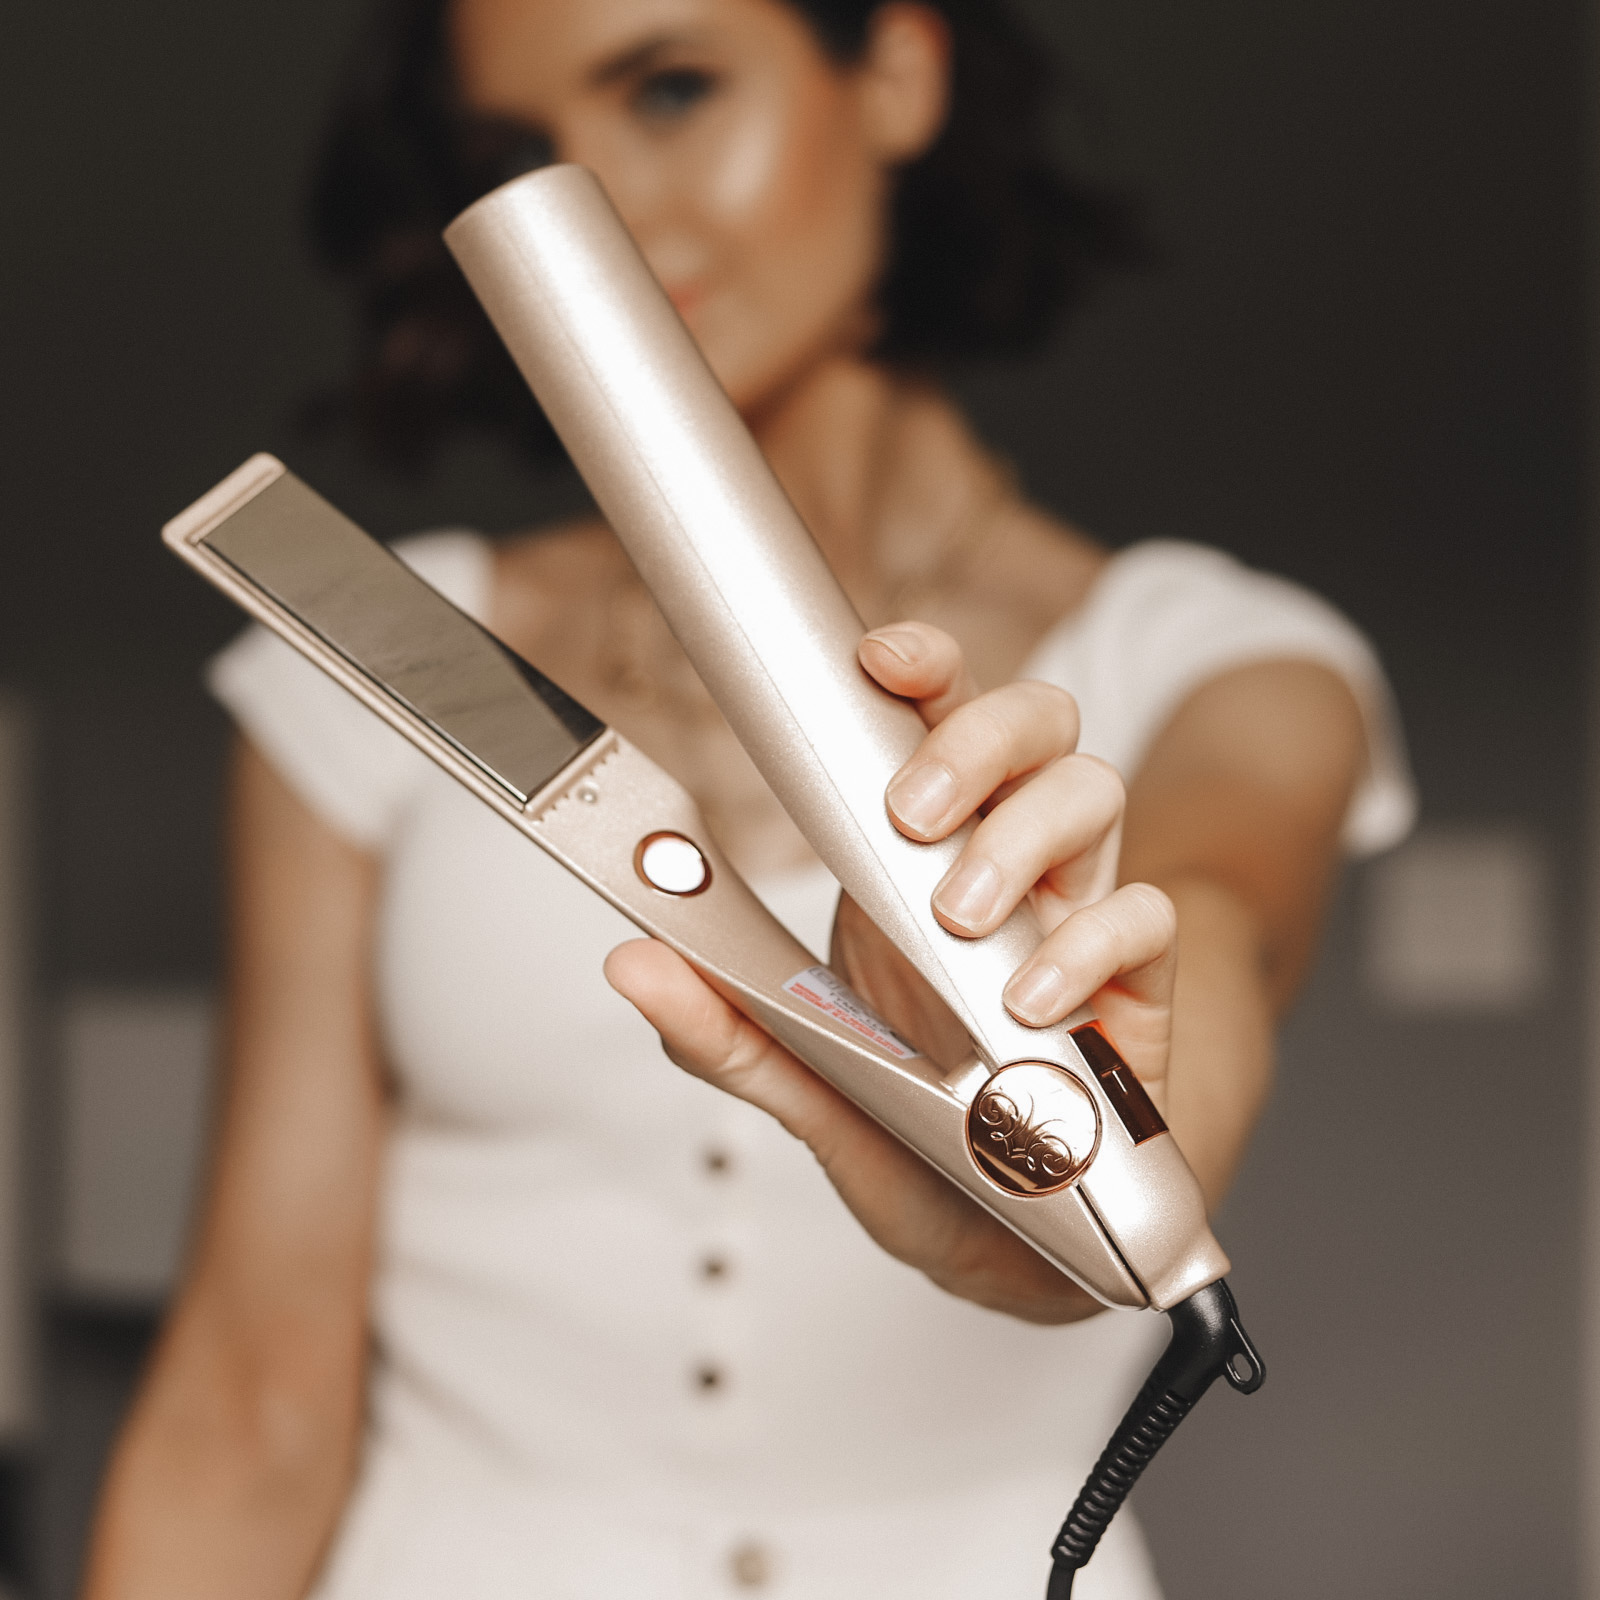 Woman in a white shirt holding a Tyme hair straightener curler